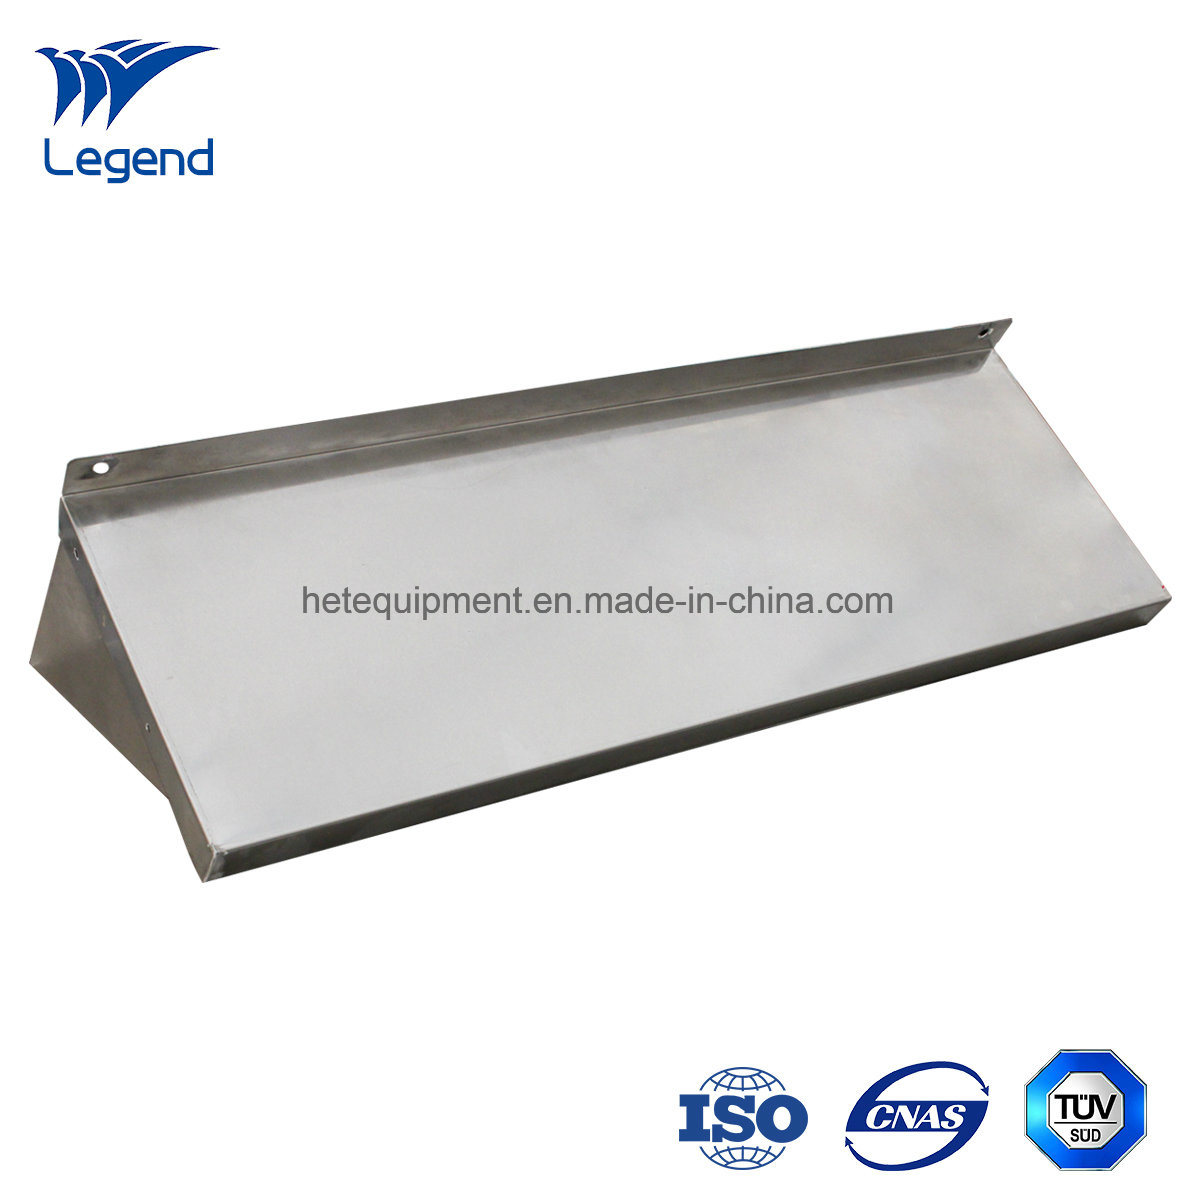 Top Grade Knock-Down Stainless Steel Wall Mounted Shelf